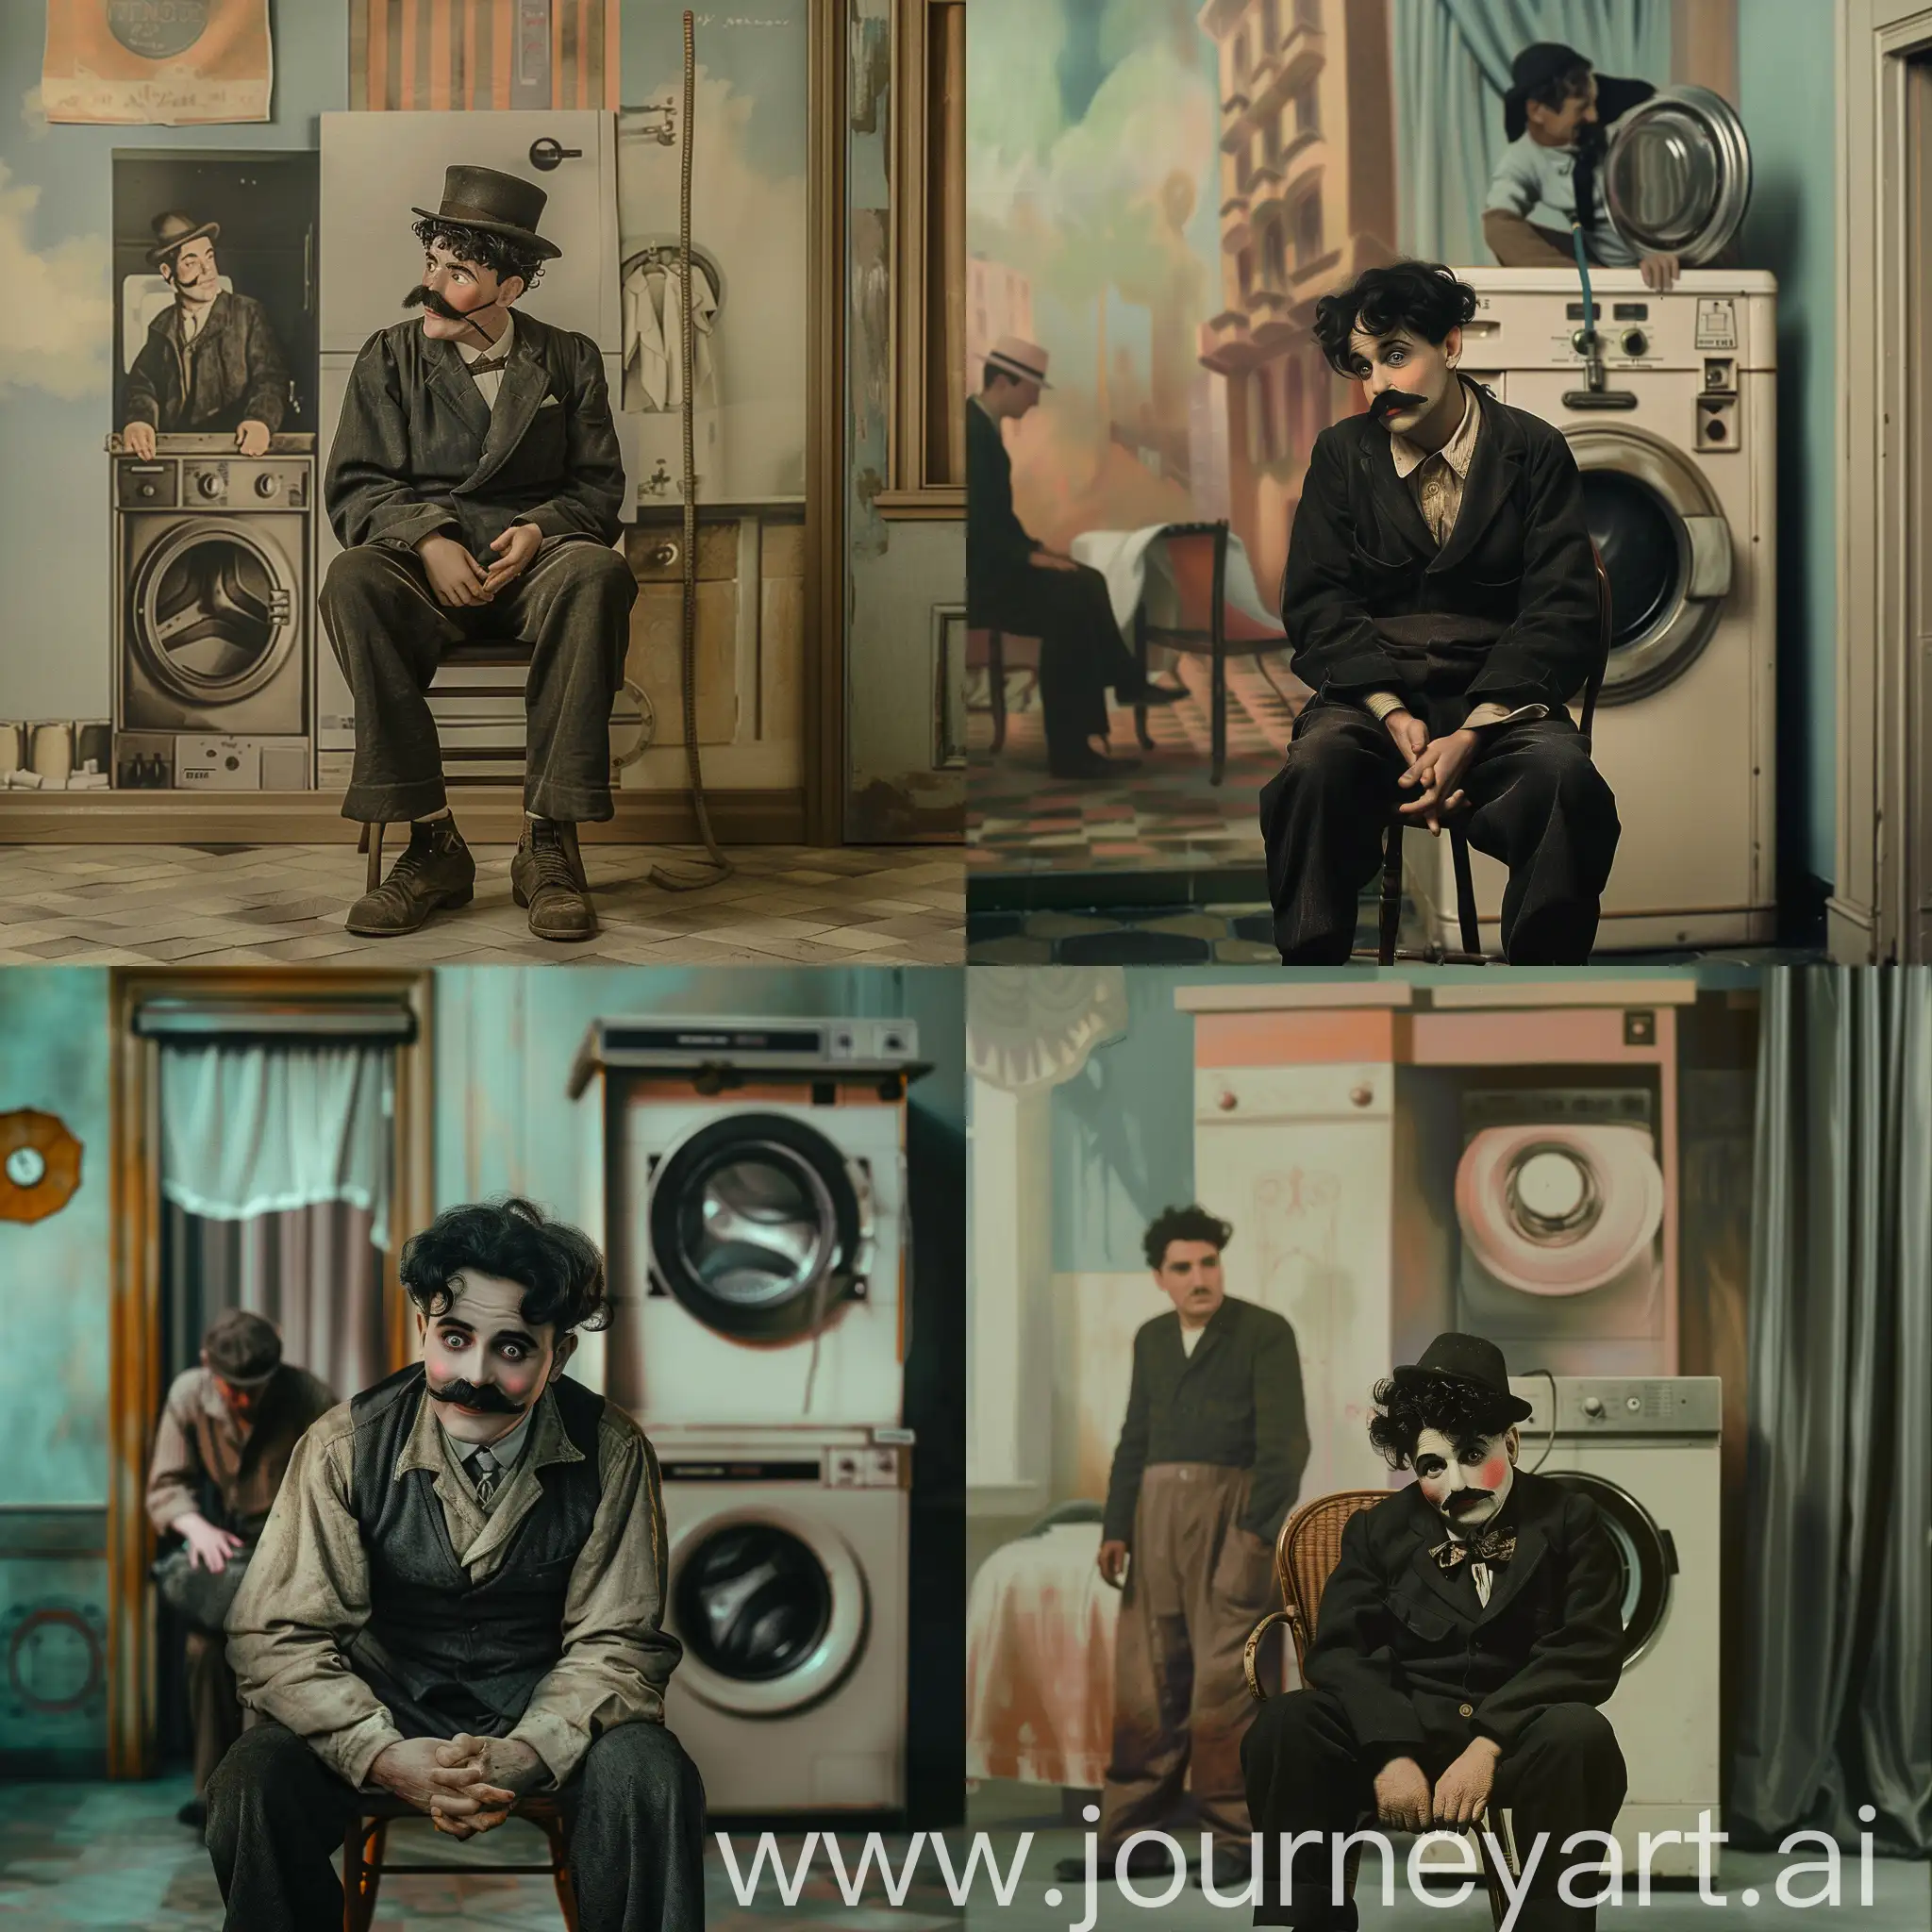 charlie chaplin sitting on a chair waiting for the repairman of his washing machine to finish his work, looking at the camera and smiling. Behind him is an image of a hotel room, high quality, super real, with calm colors